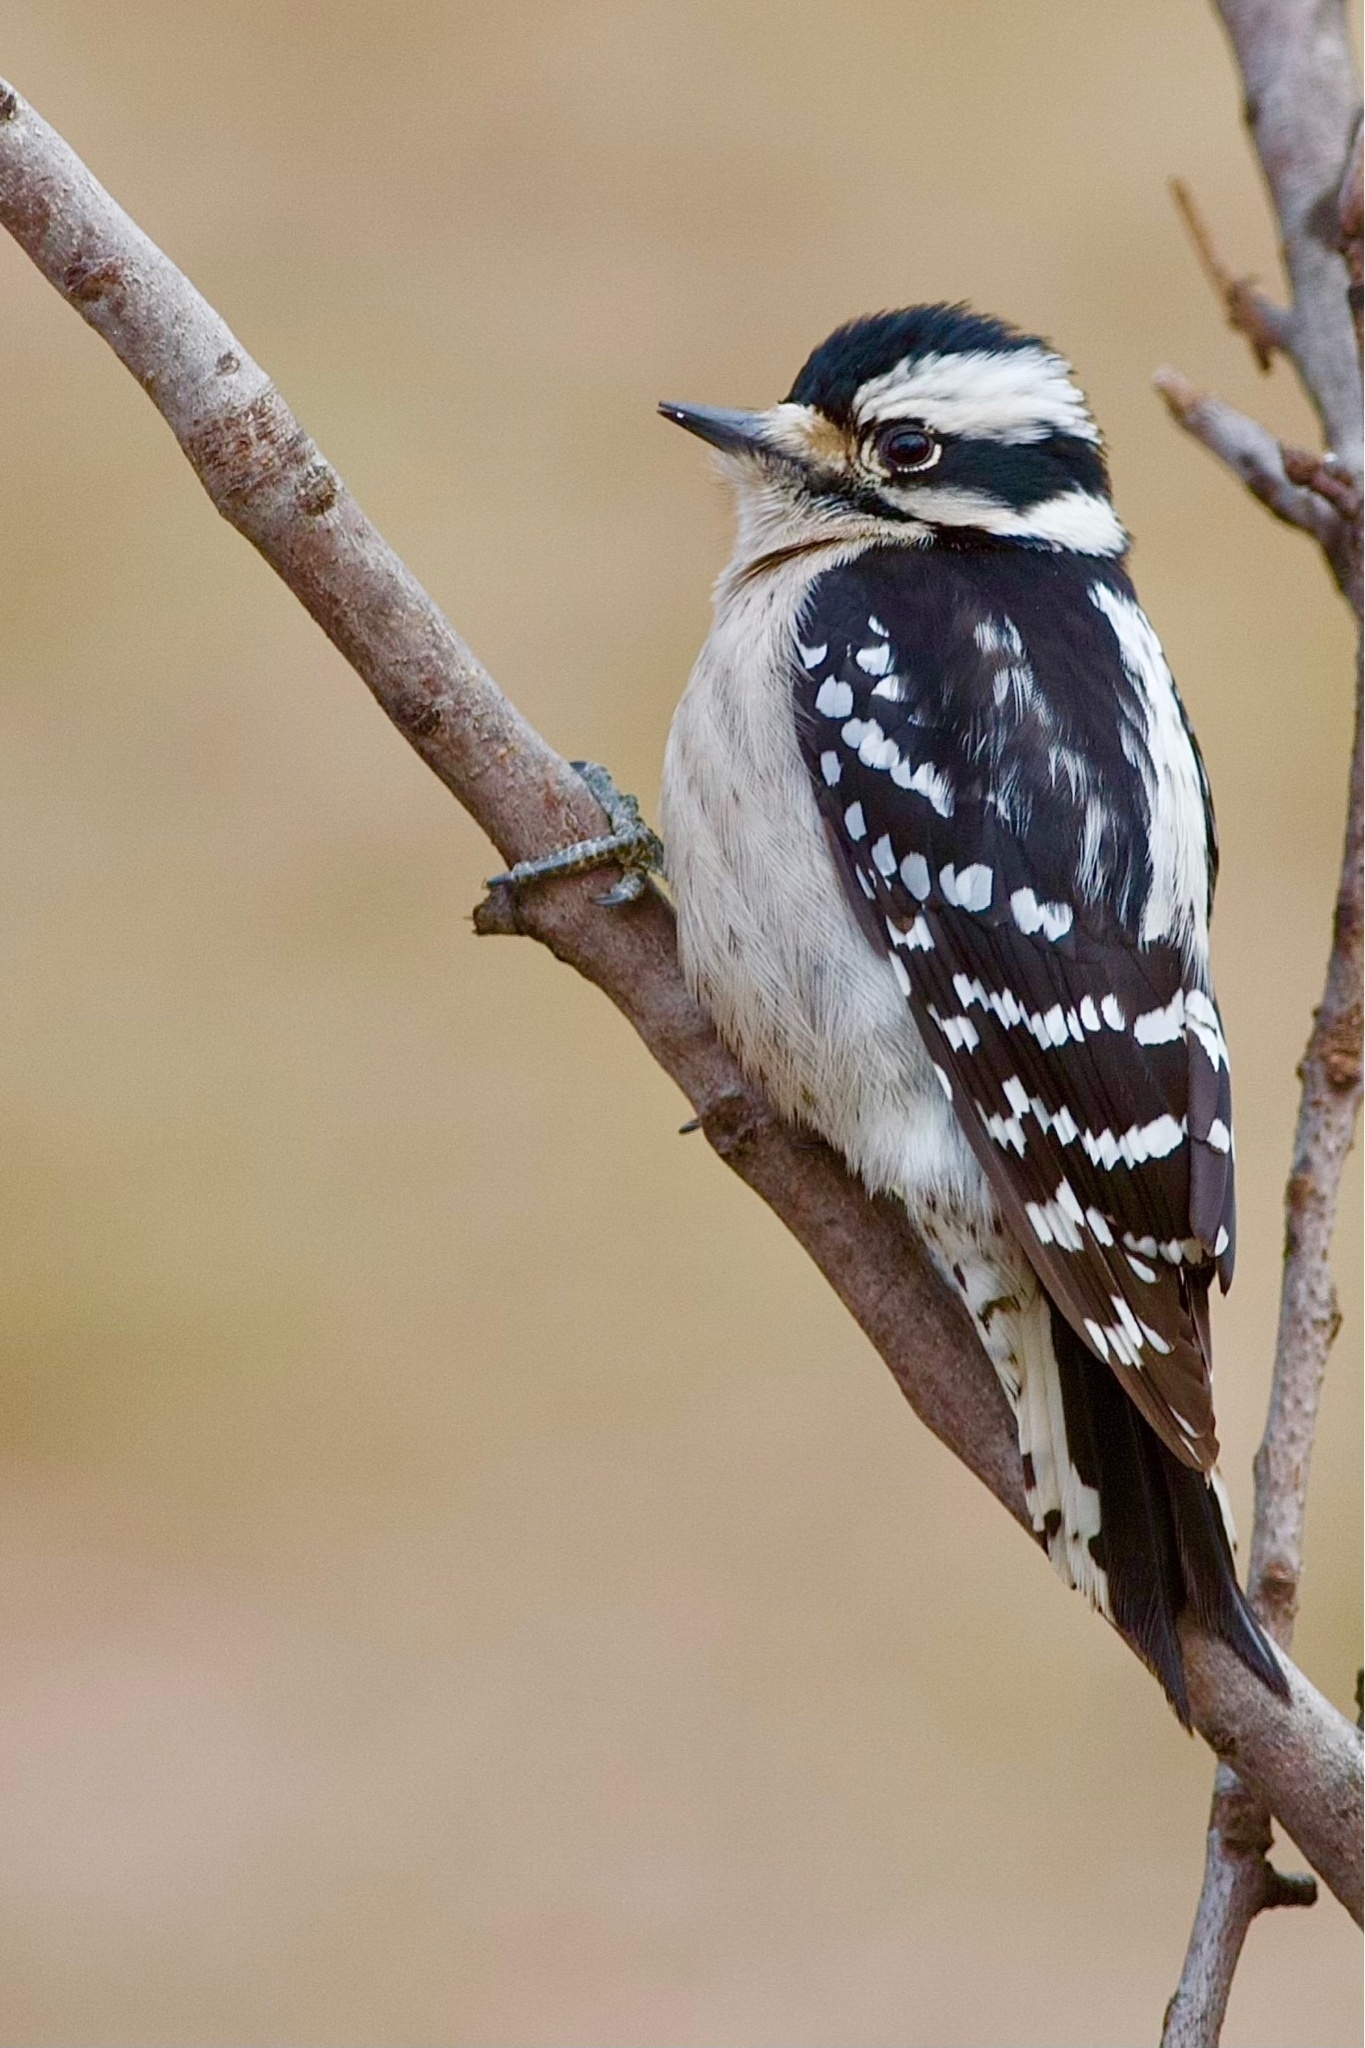 A bird is perched on the side of a tree. Black and white on the backside, white on the underside, it has a black and white head with alternating stripes.